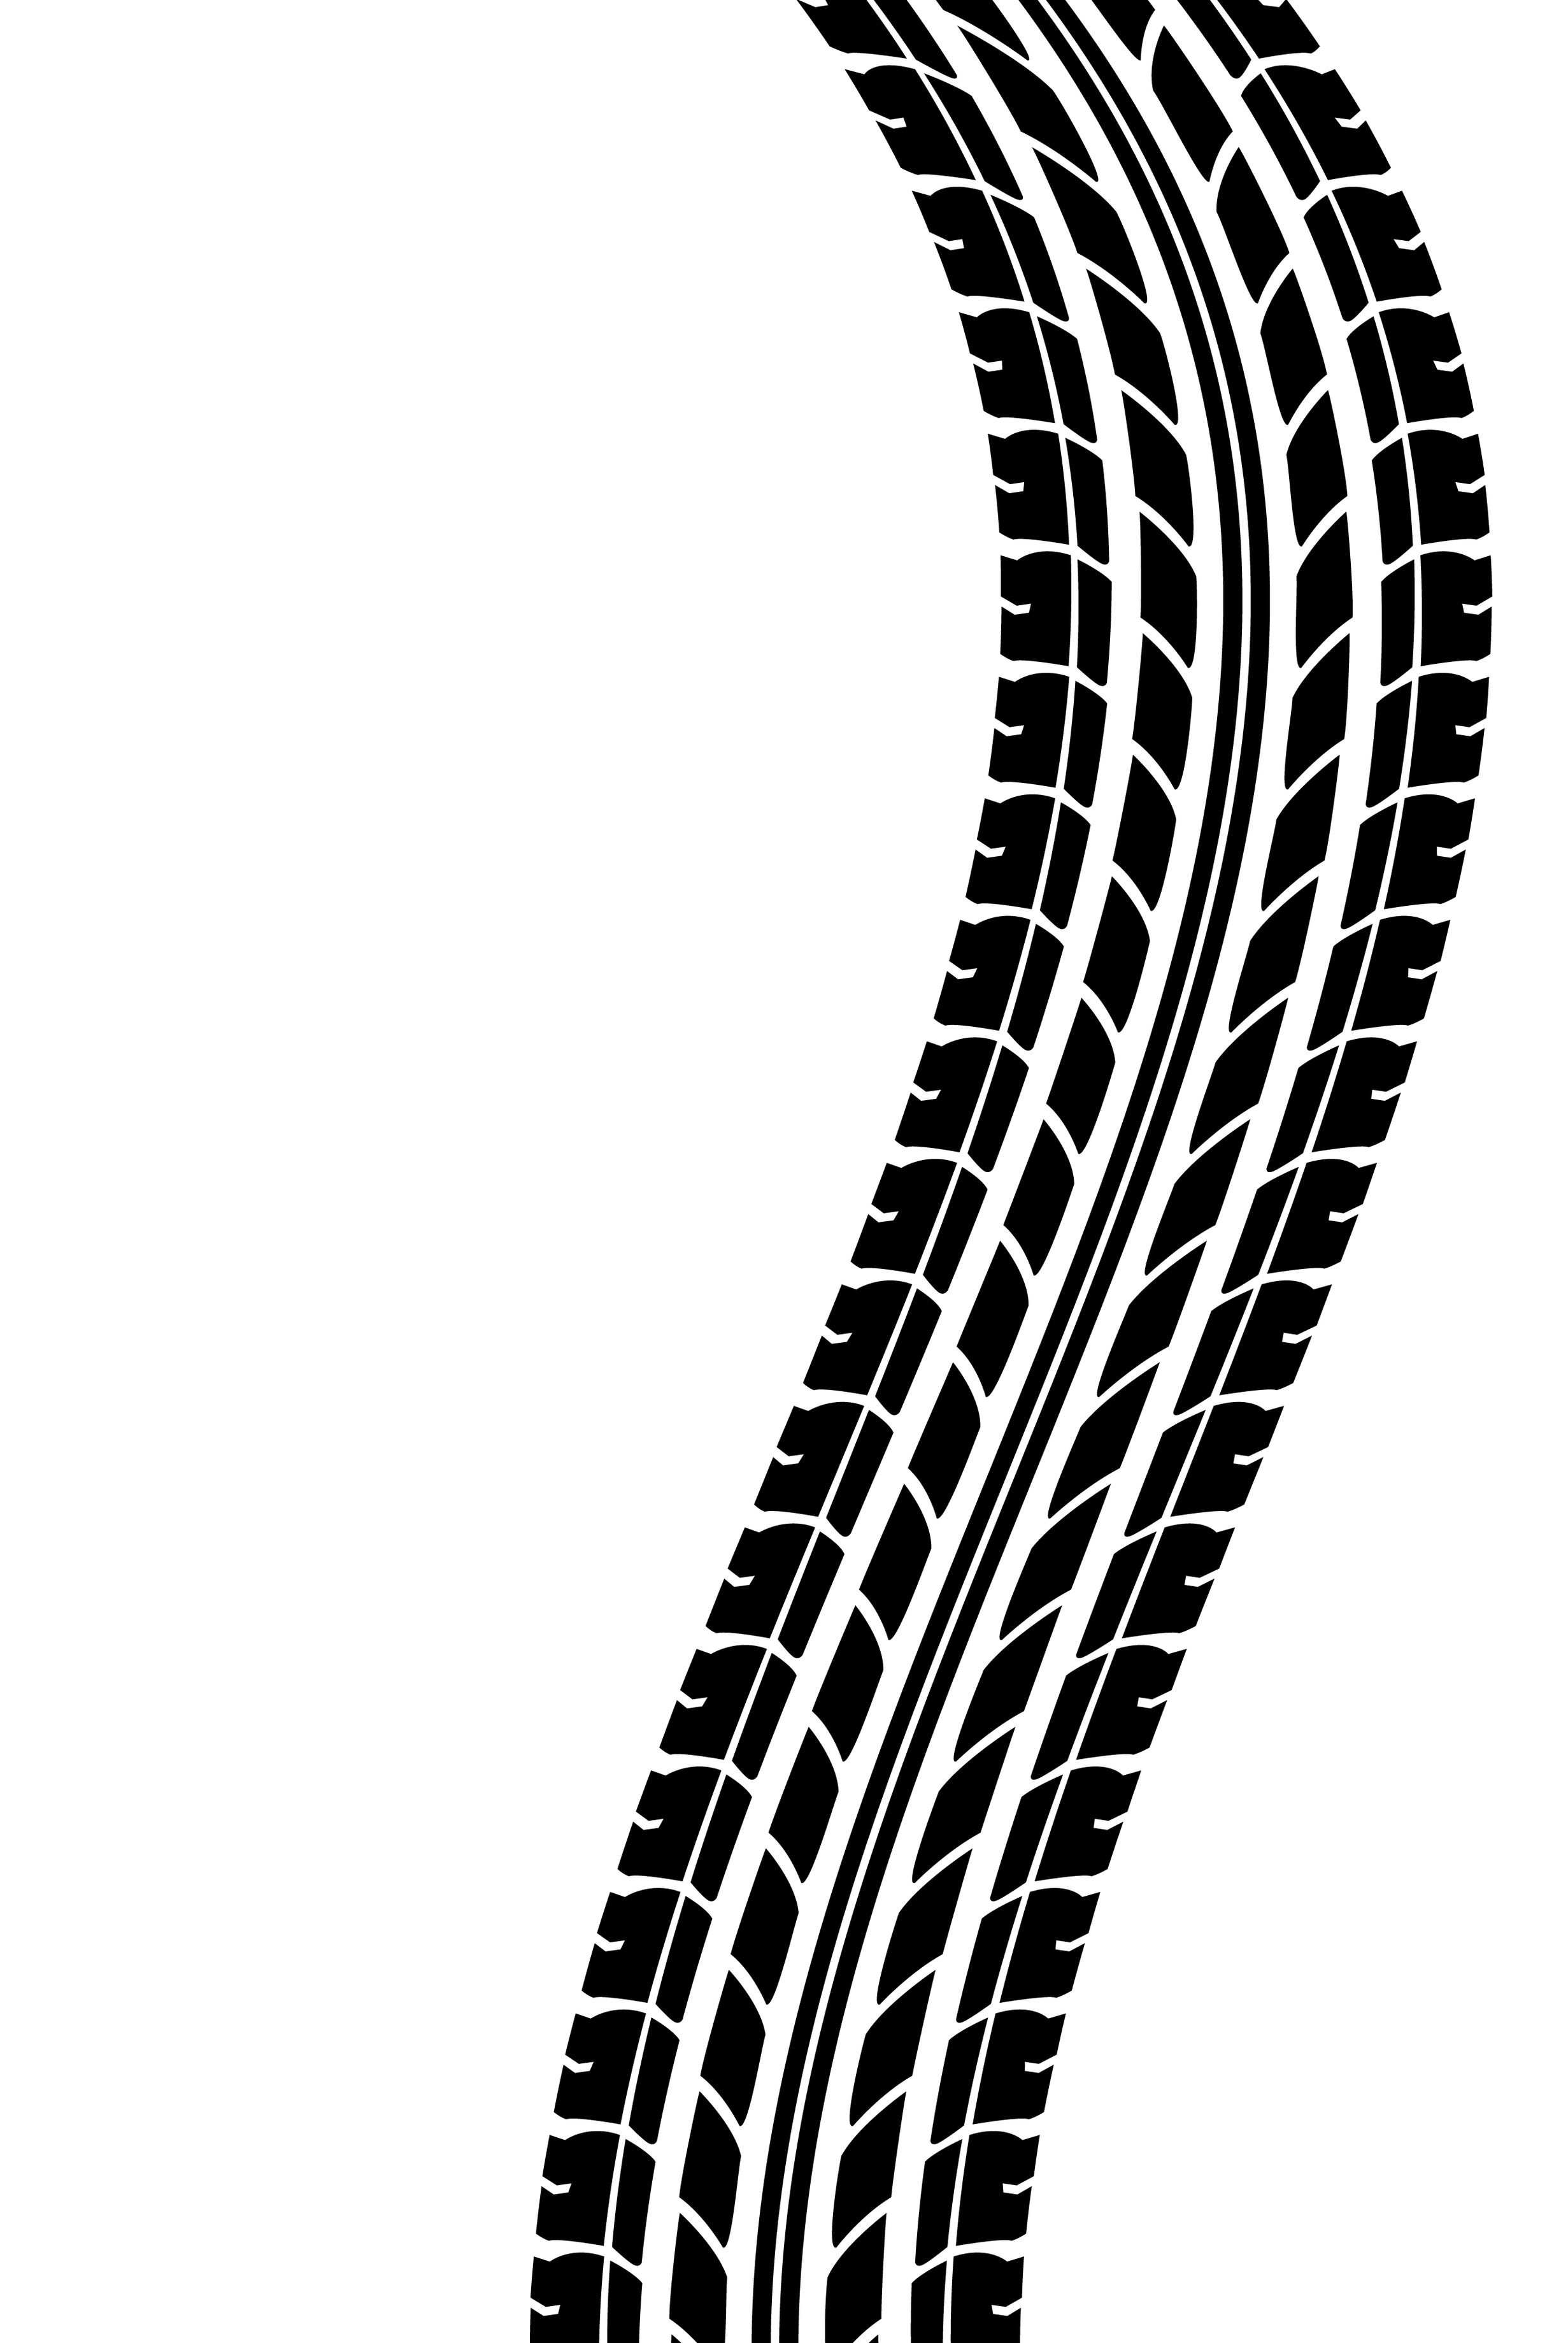 Tyre Tracks Clipart Clipart - Free to use Clip Art Resource